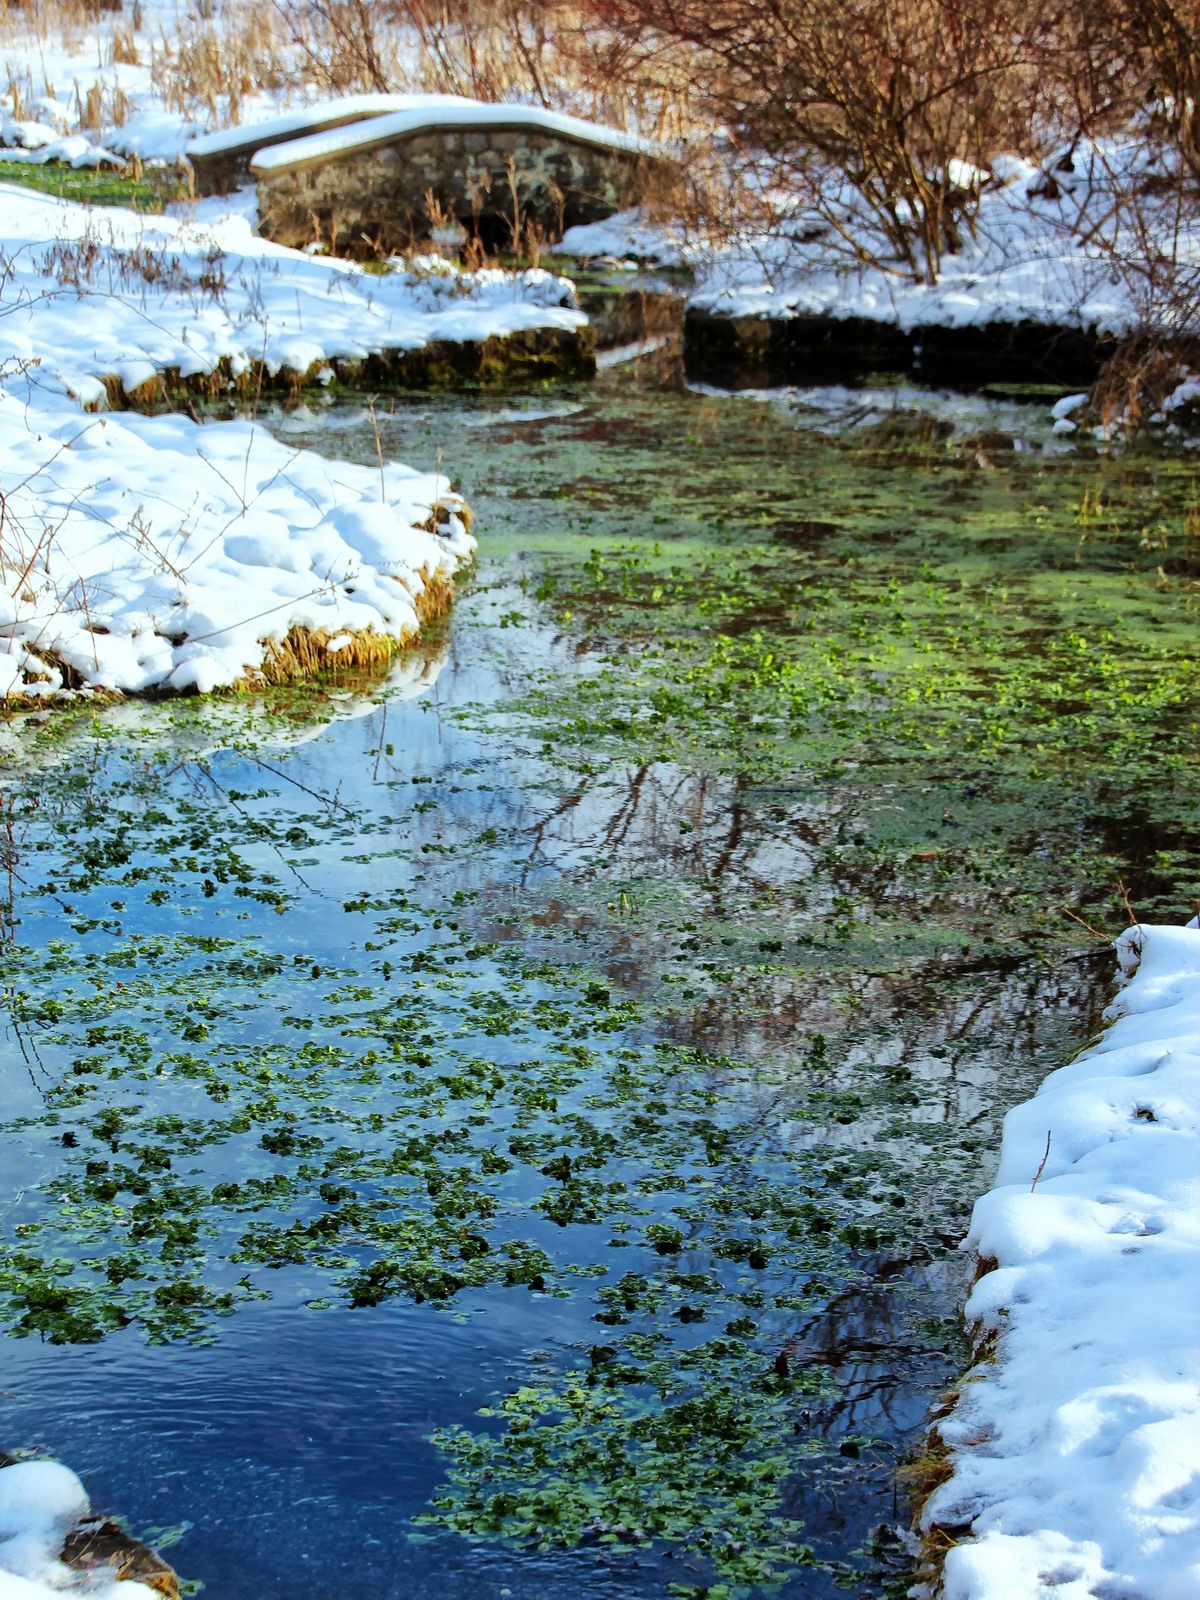 In search of color during a long winter, this natural spring offered a sanctuary of color.